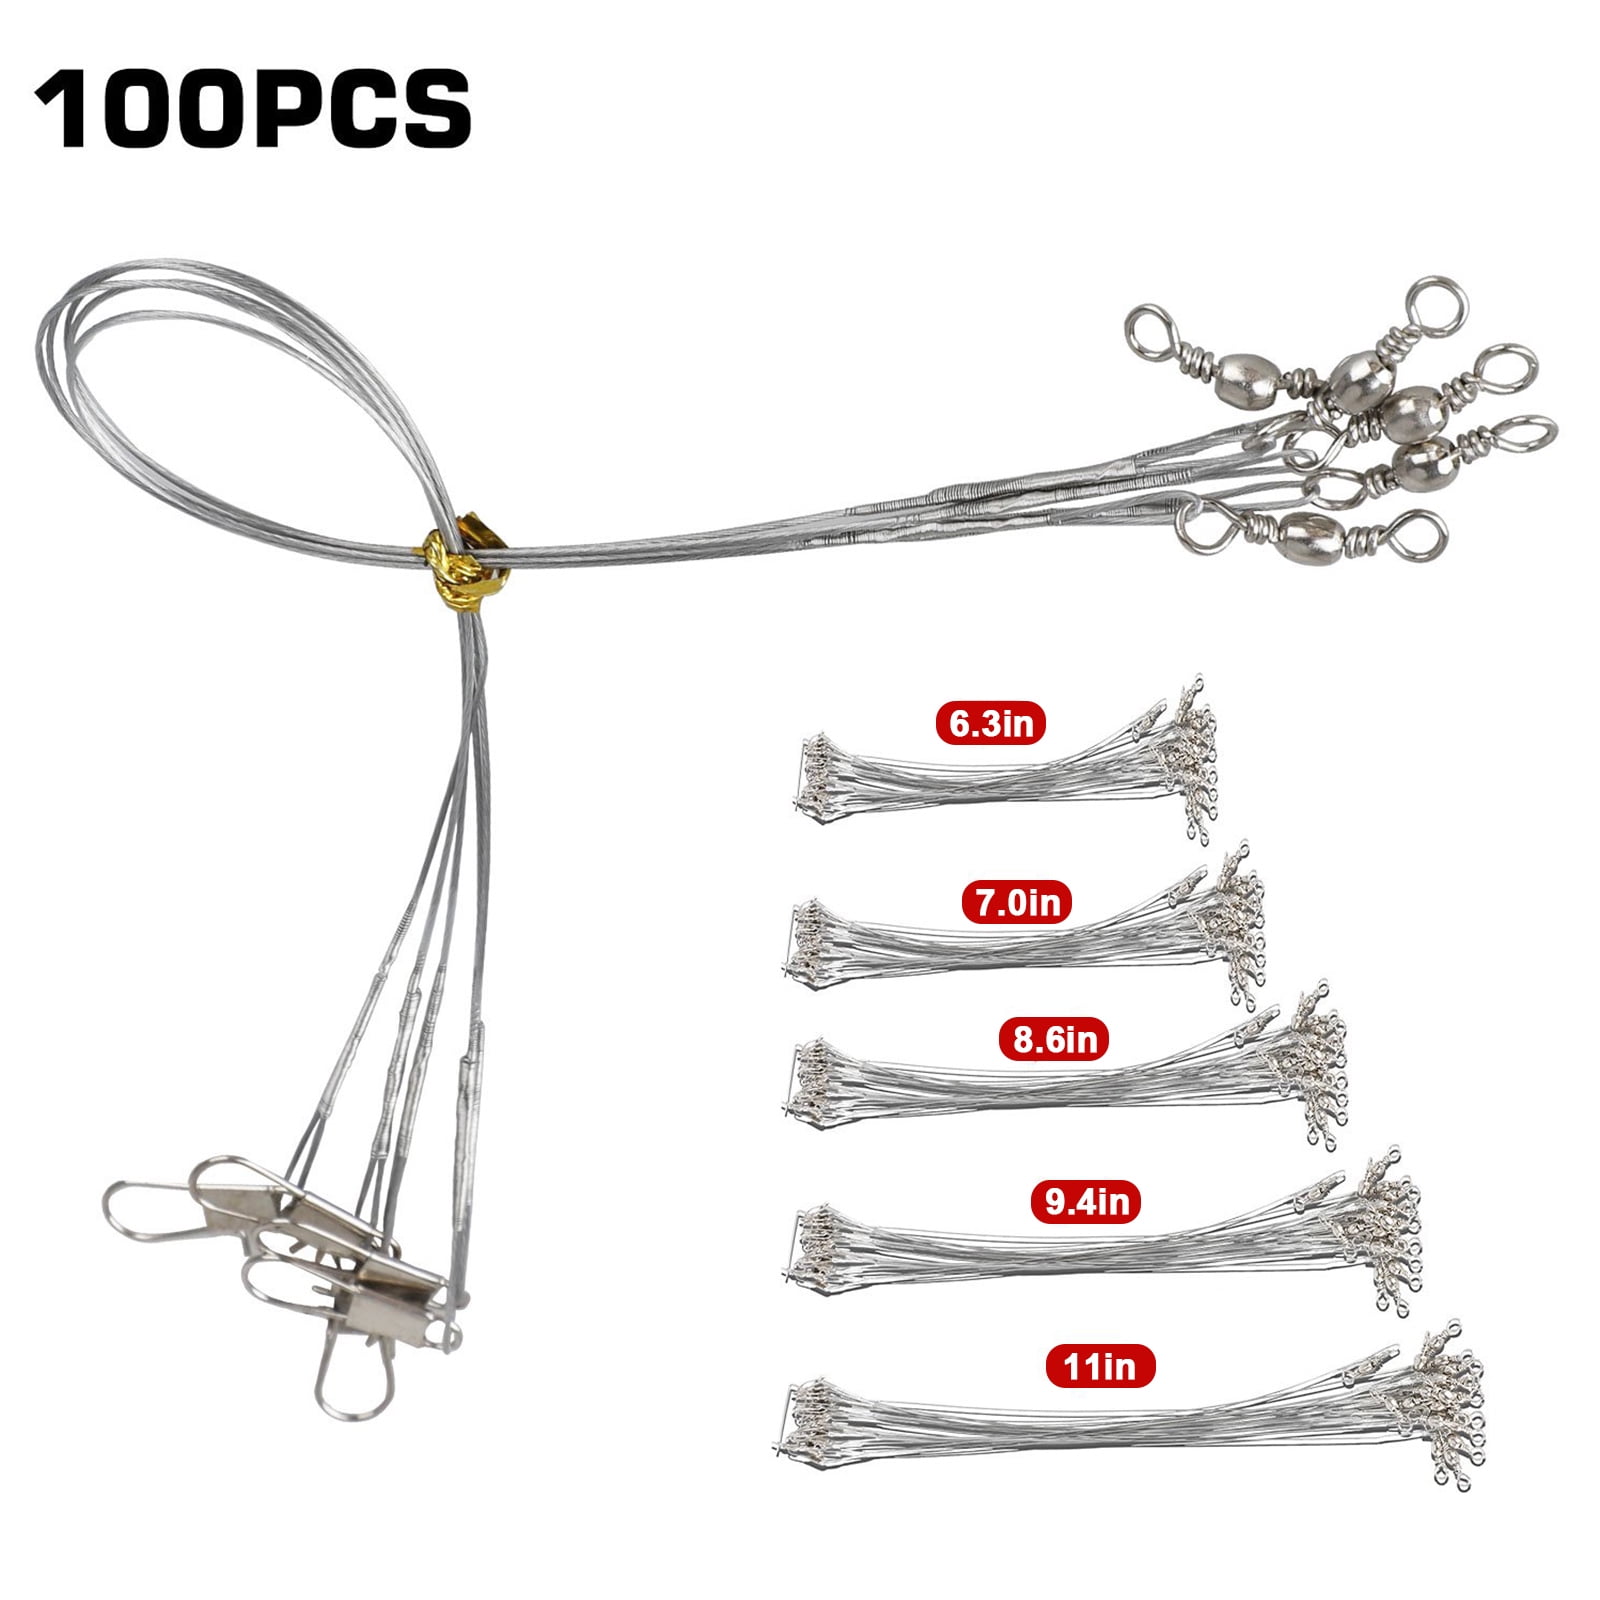 100pcs Fishing Leader Line Trace Lure Stainless Steel Wire Leader Spinner Swivel 